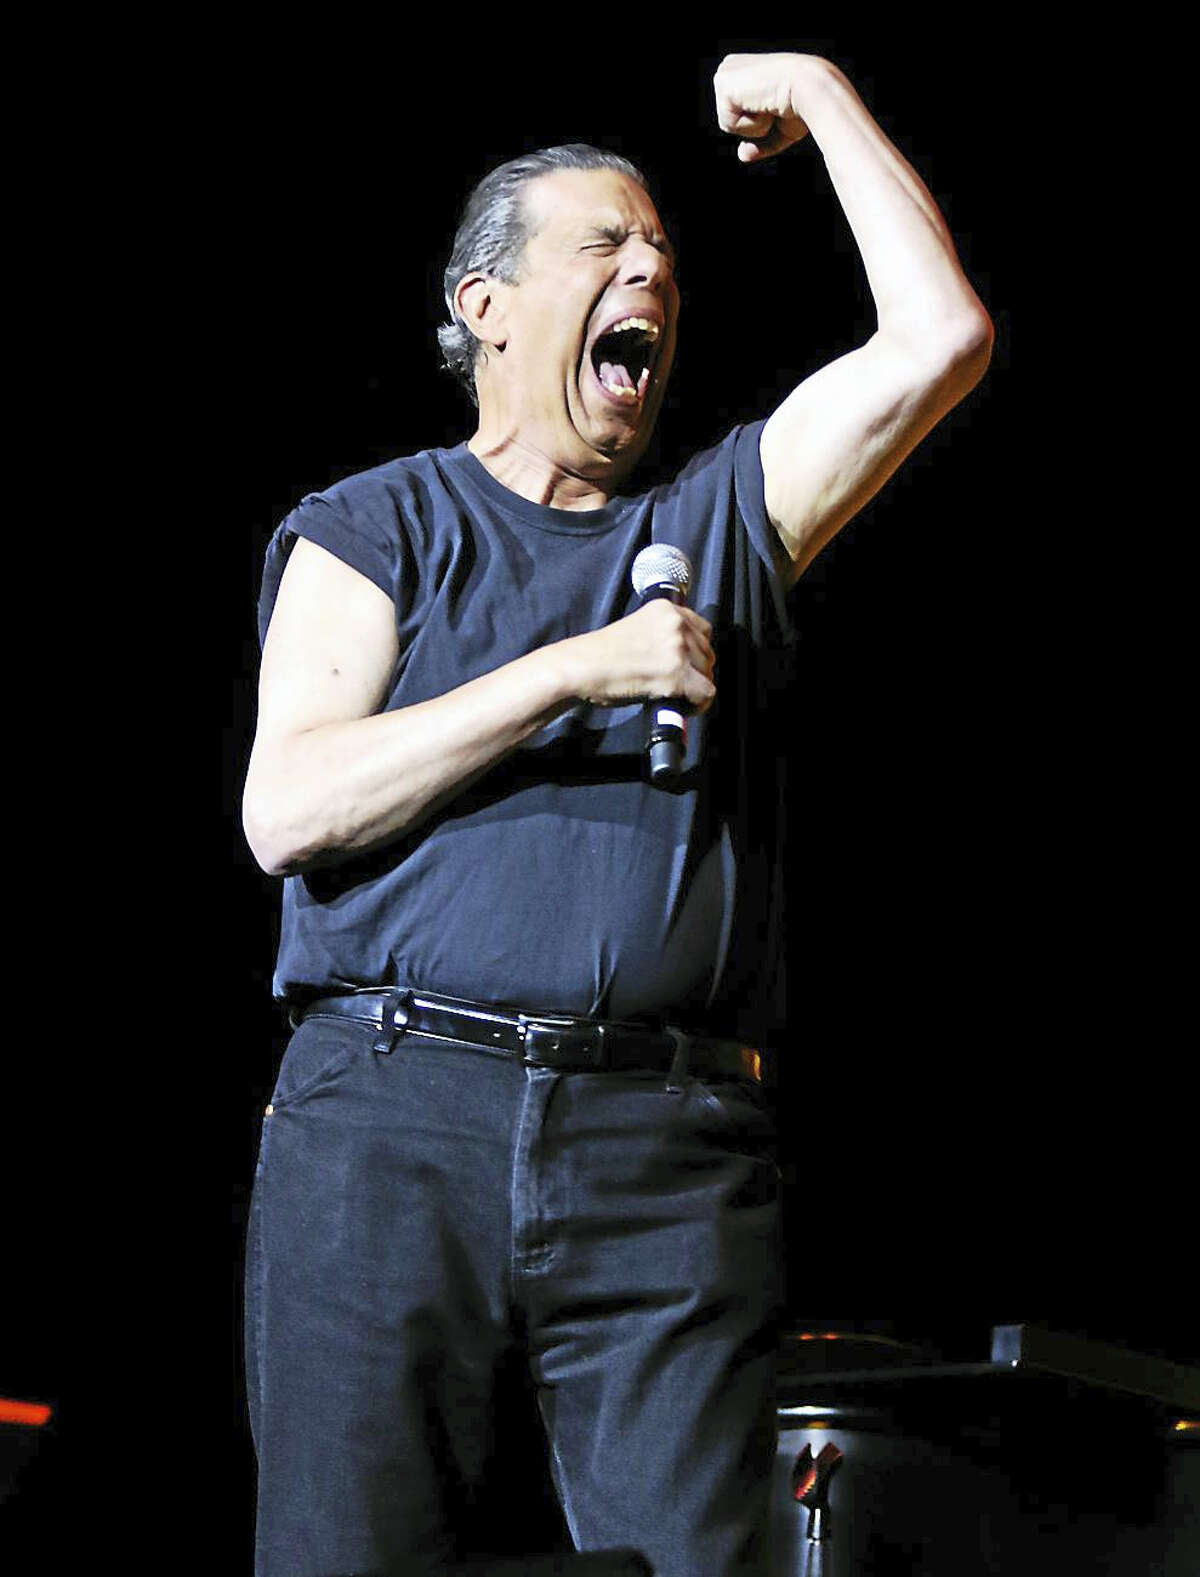 Photo by John Atashian Musician Jon “Bowzer” Bauman, best known as a member of the band Sha Na Na and game show host, makes his classic pose while performing at the Mohegan Sun Arena in Uncasville on Jan. 17. The concert marked the 15th Anniversary of Bowzer’s Rock N’ Doo Wop which featured performances by Little Anthony & the Imperials, Fred Paris & the Five Satins, Jay Siegel’s Tokens, Shirley Alston Reeves of The Shirelles, Paul & Paula, Joey Dee, The Dubs, Johnny Farina of Santo & Johnny and Bowzer & The Stingrays. The concert attracted a capacity crowd of nearly 9,000 fans. To view all upcoming entertainment coming to the Mohegan Sun Casino, visit www.mohegansun.com